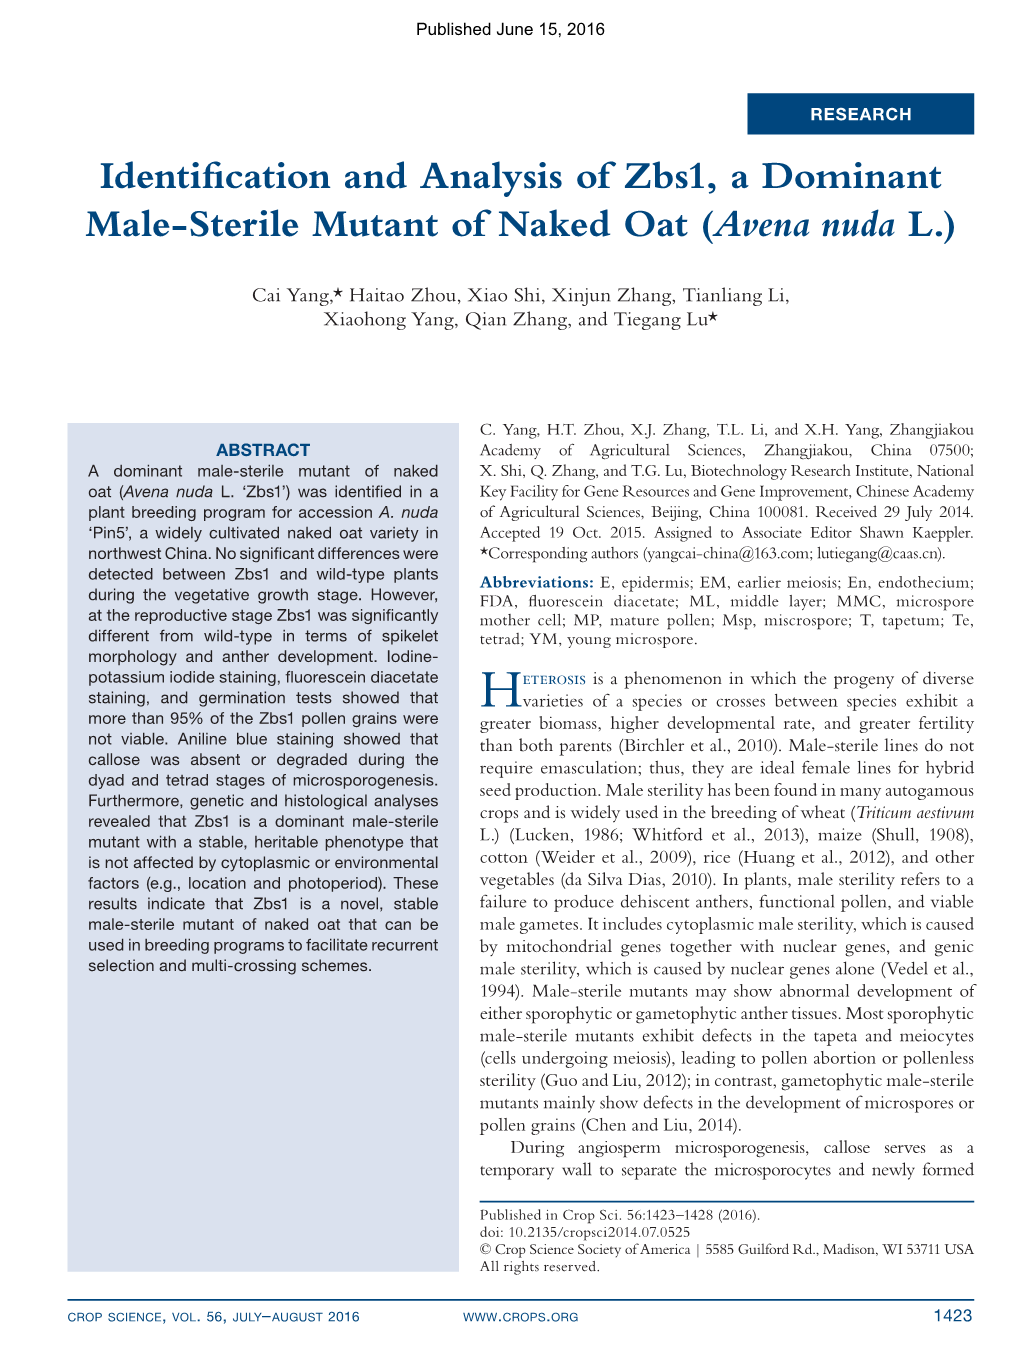 Identification and Analysis of Zbs1, a Dominant Male-Sterile Mutant of Naked Oat (Avena Nuda L.)